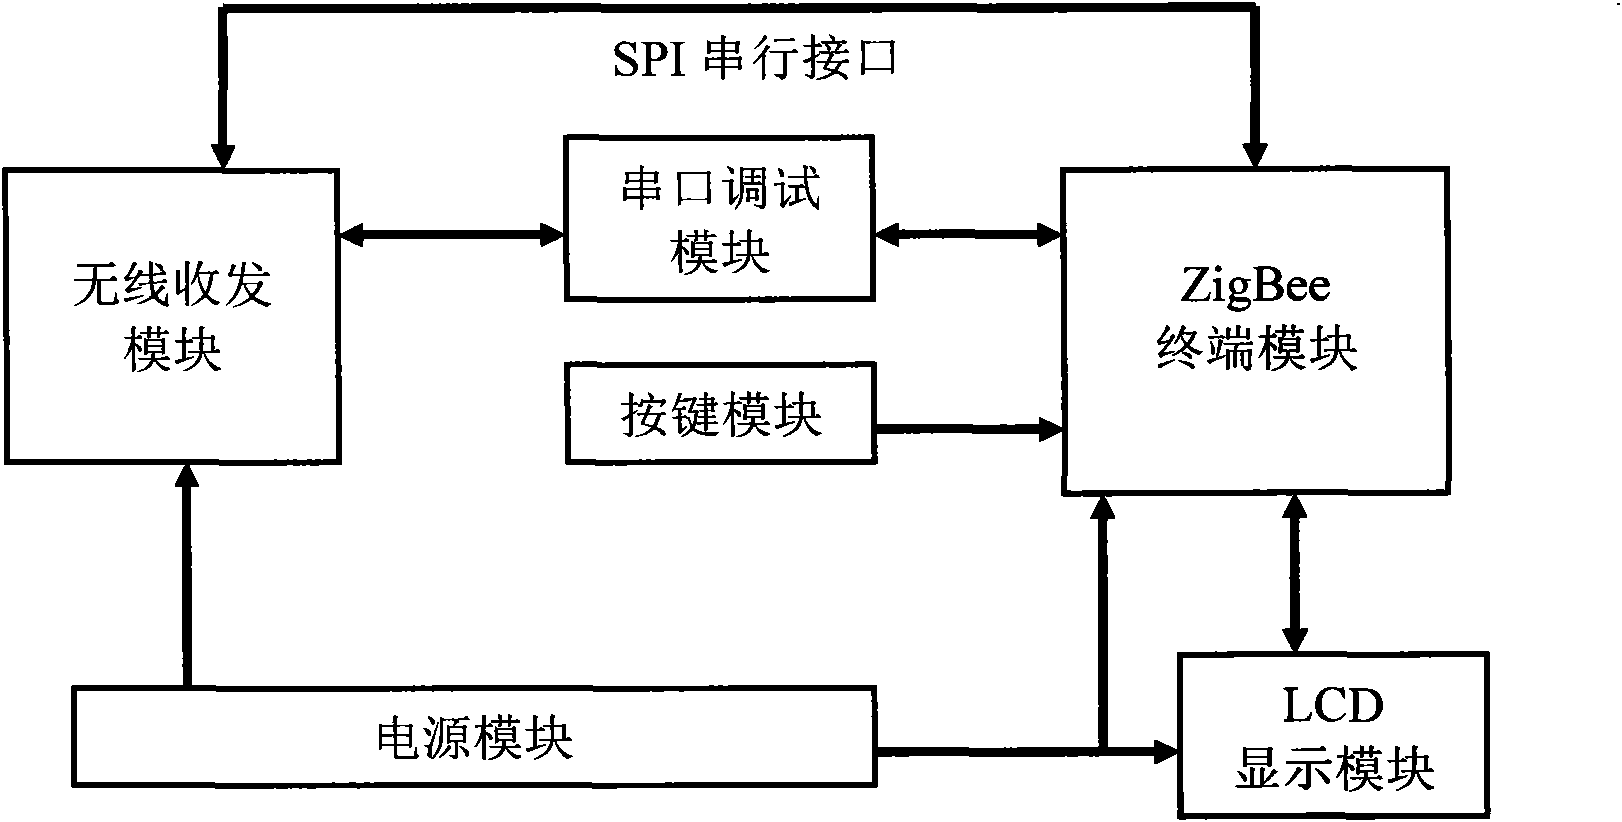 Low-power wireless data acquisition system